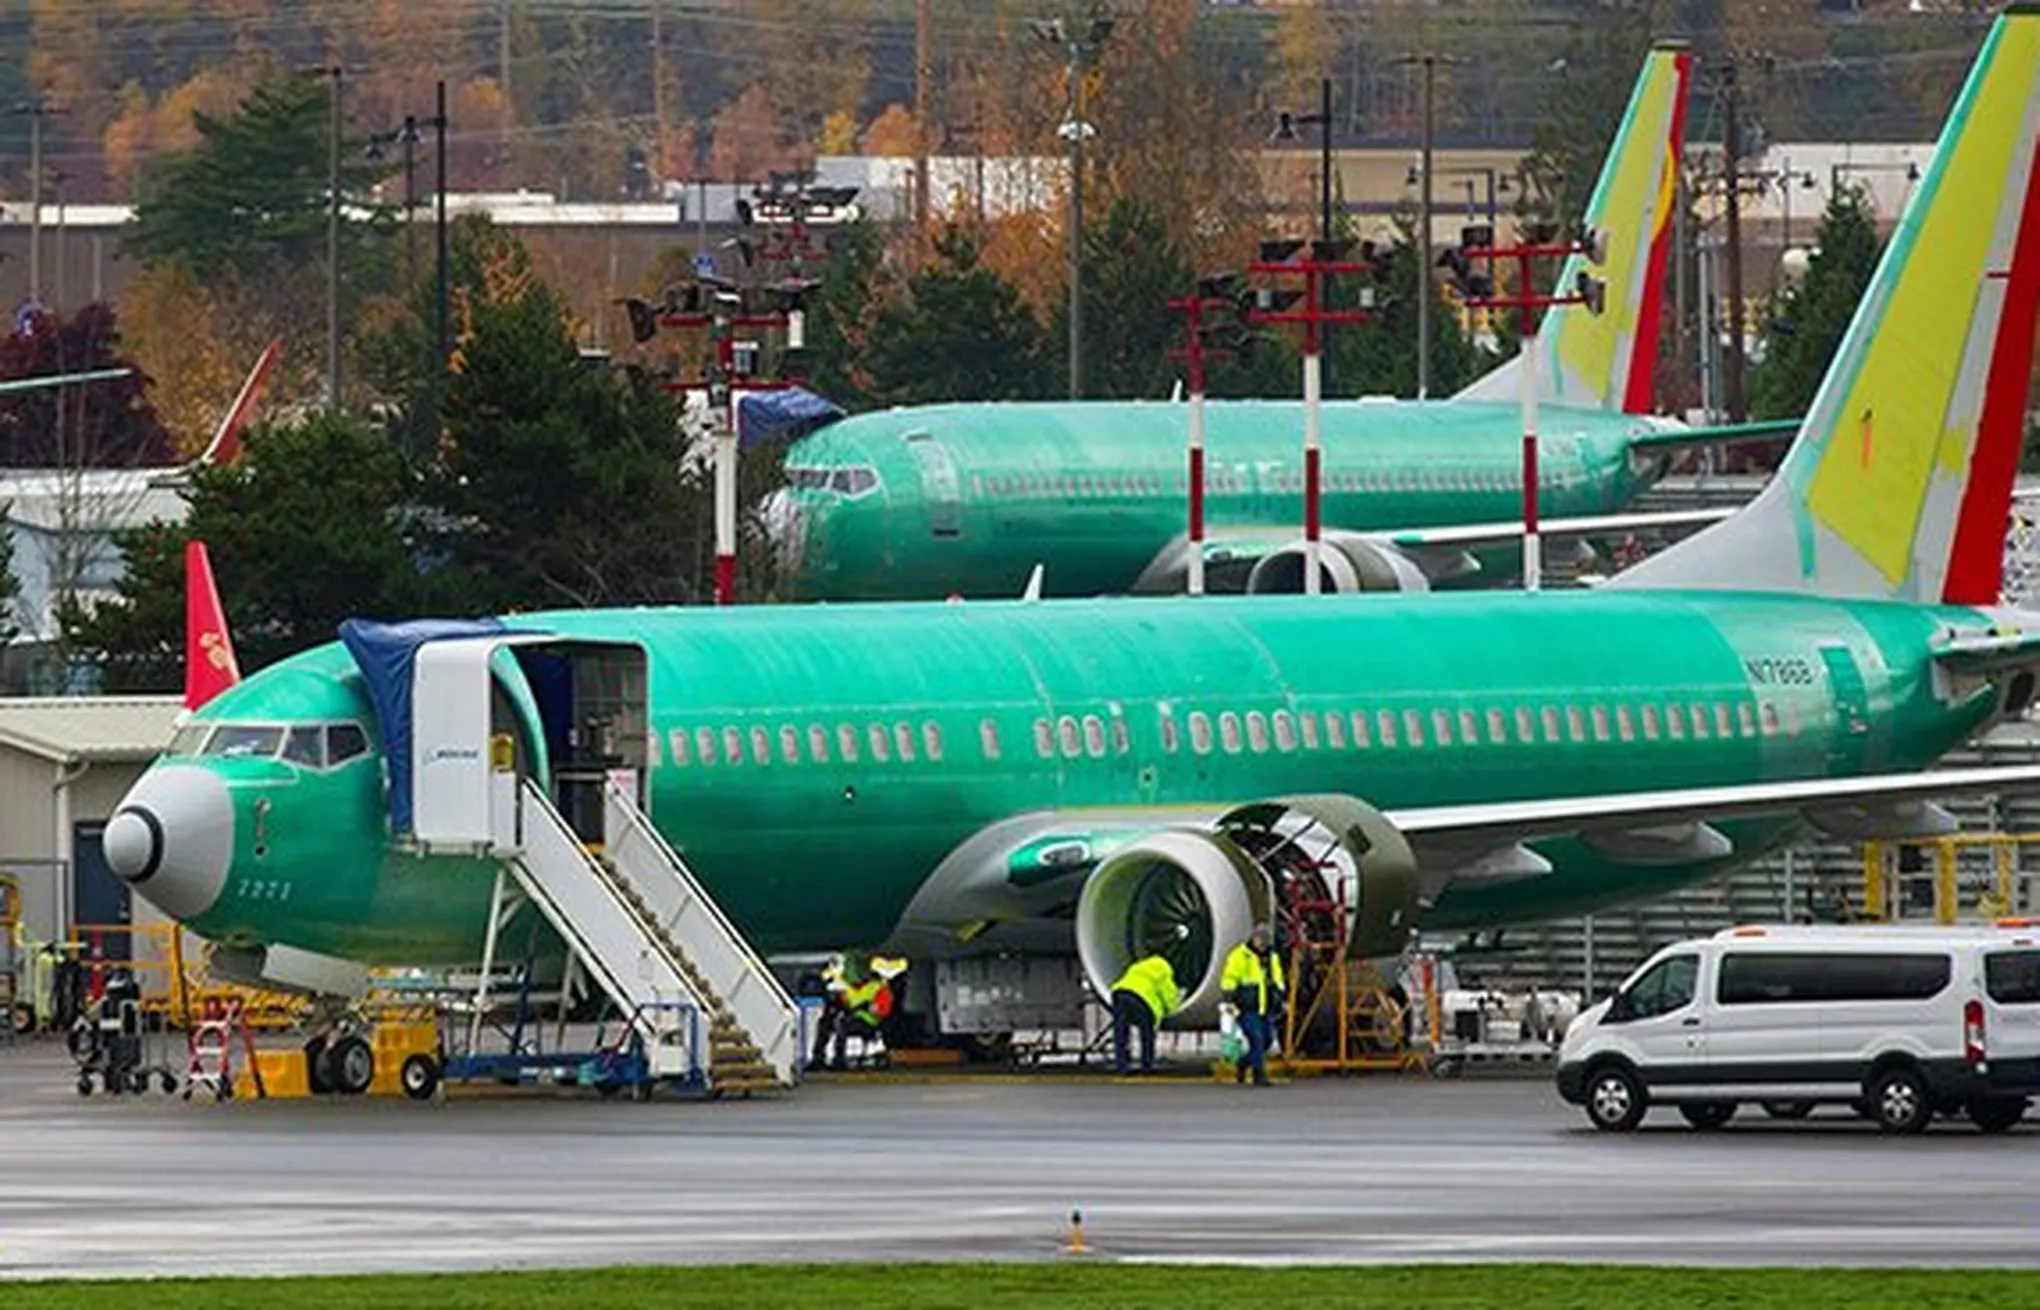 Boeing’s Supplier Tried Vaseline, Cornflour, and Talcum Powder Before Using Dawn Dish Soap to Grease a Door Seal